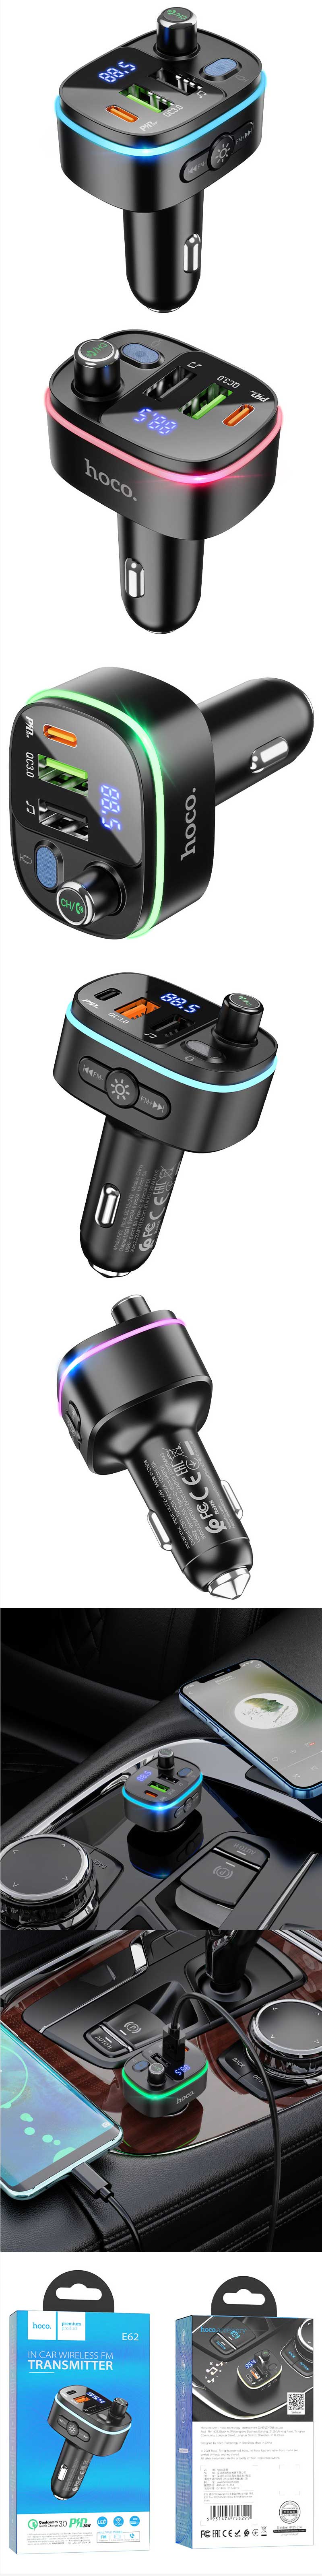 Hoco E62 Fast PD20W+QC3.0 car Charger with BT FM Transmitter